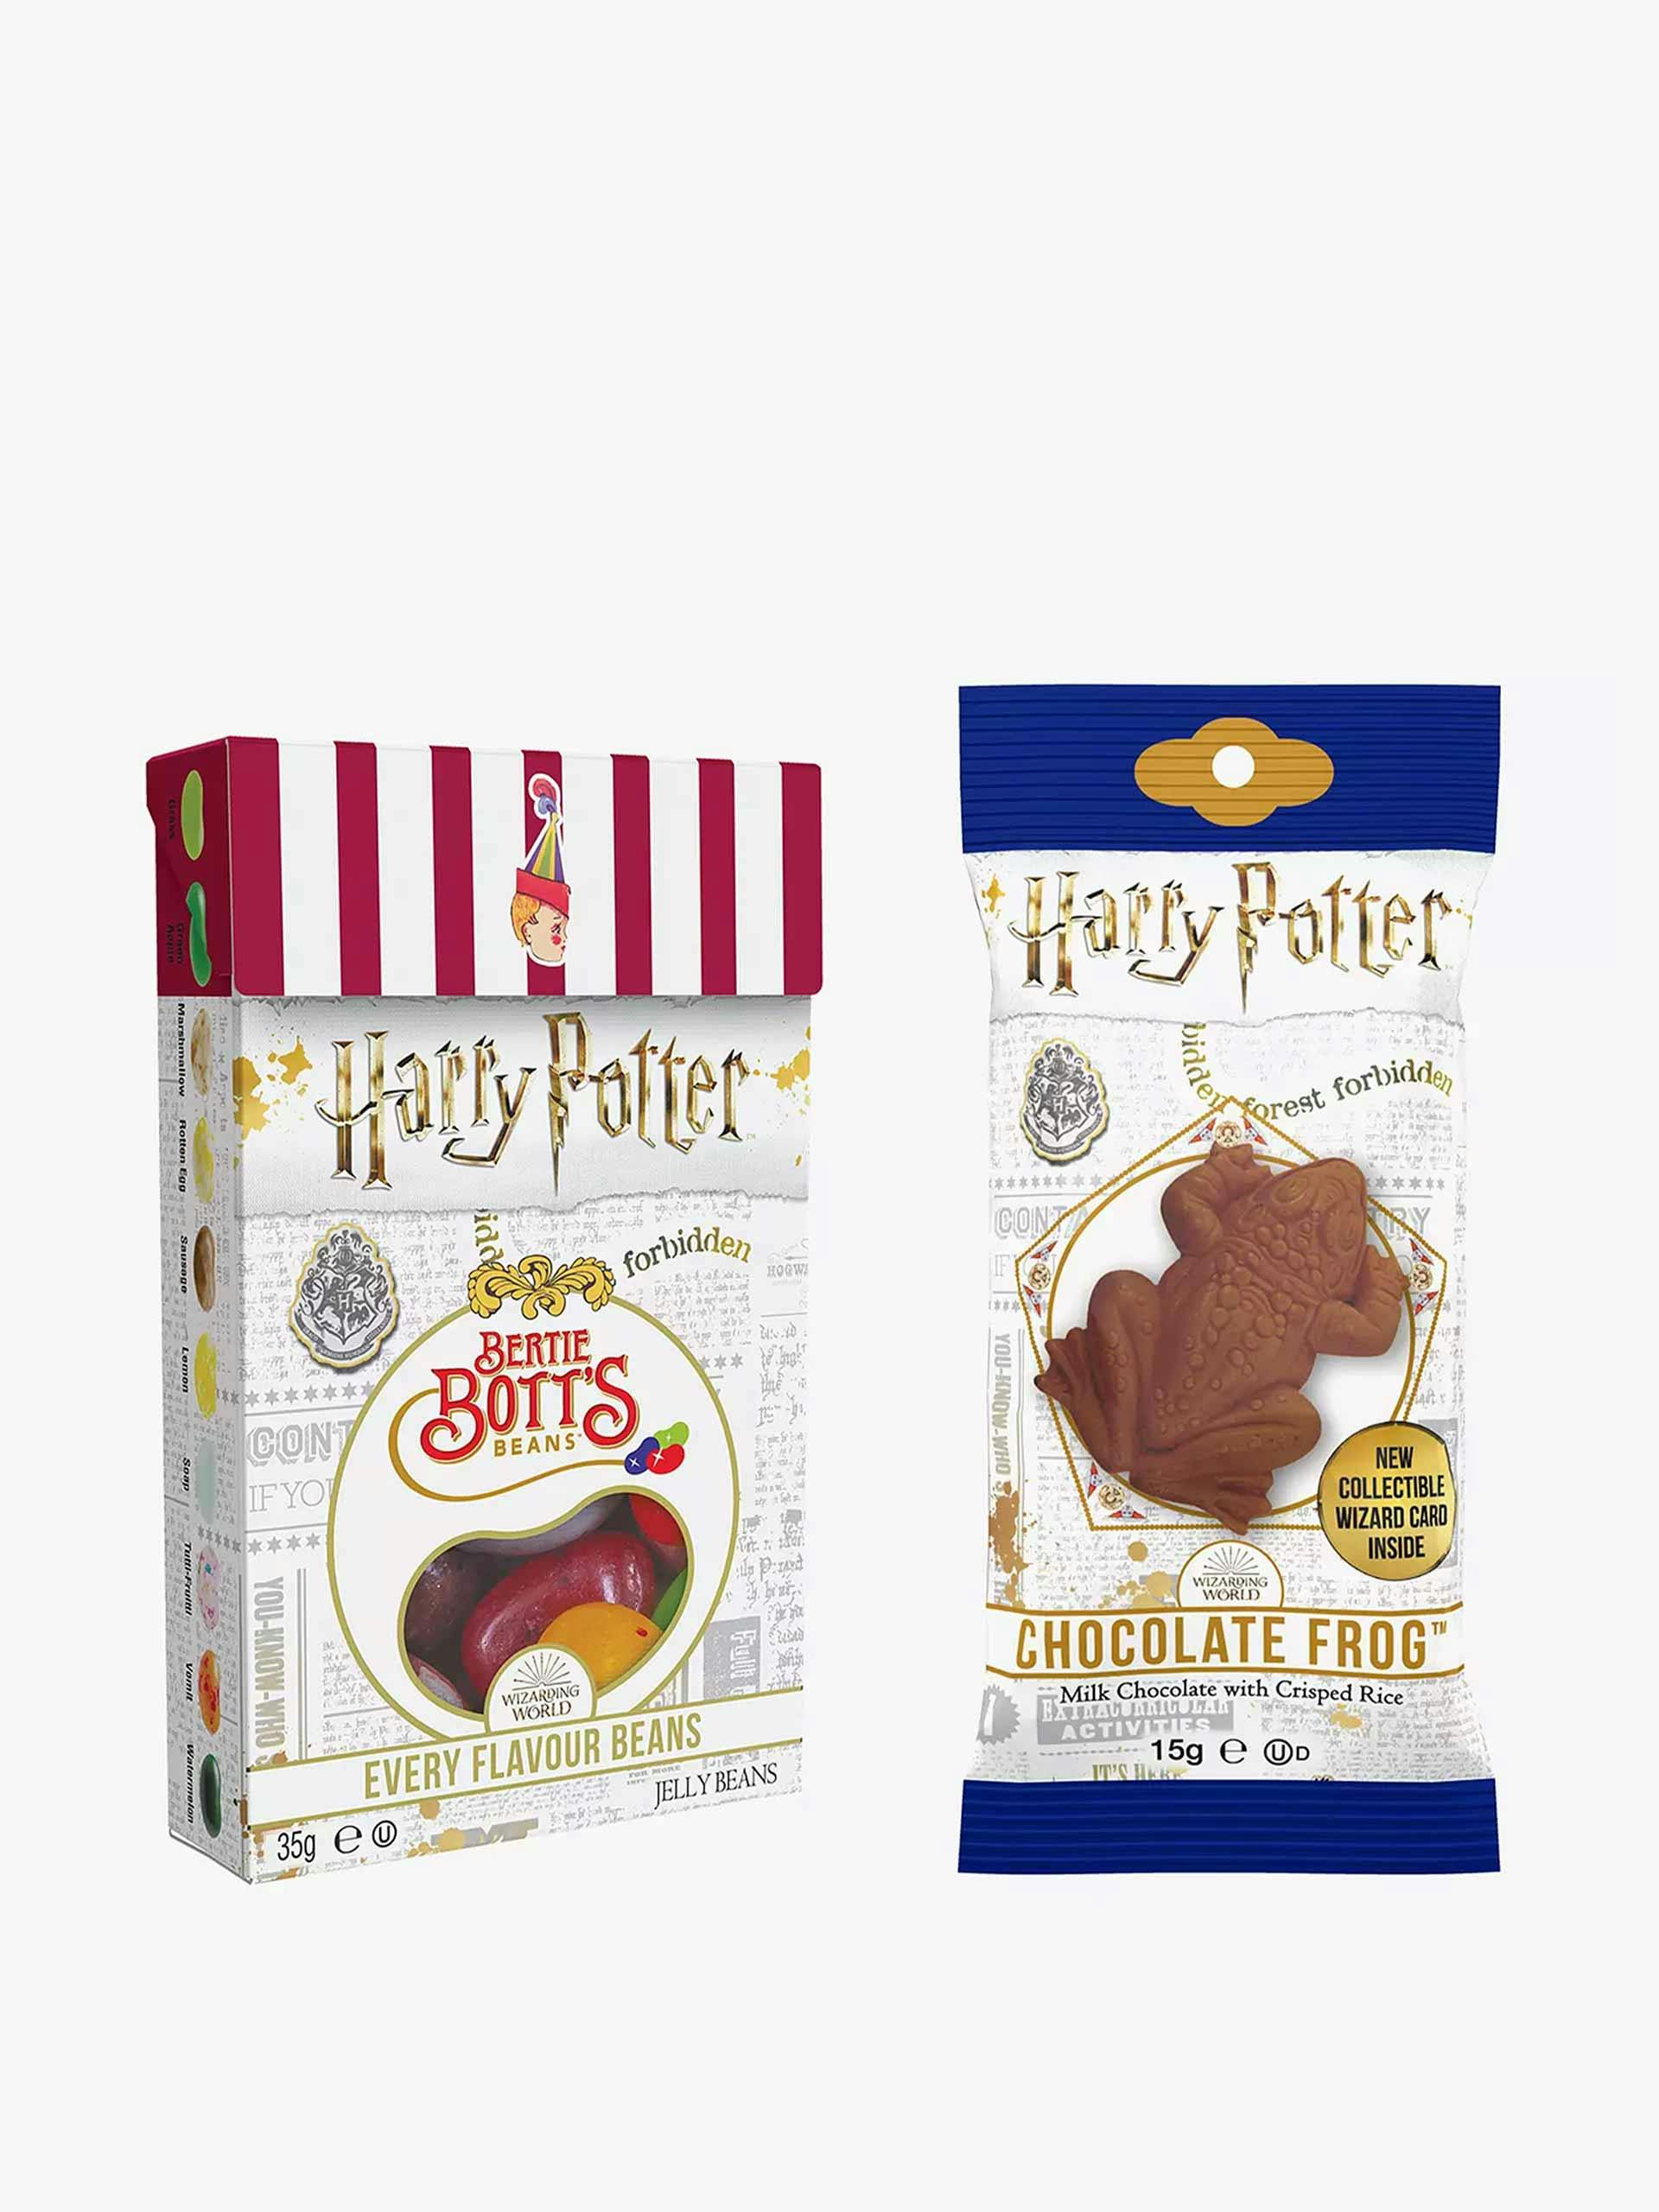 Harry Potter Chocolate Frog and Bertie Bott’s Every Flavour Beans